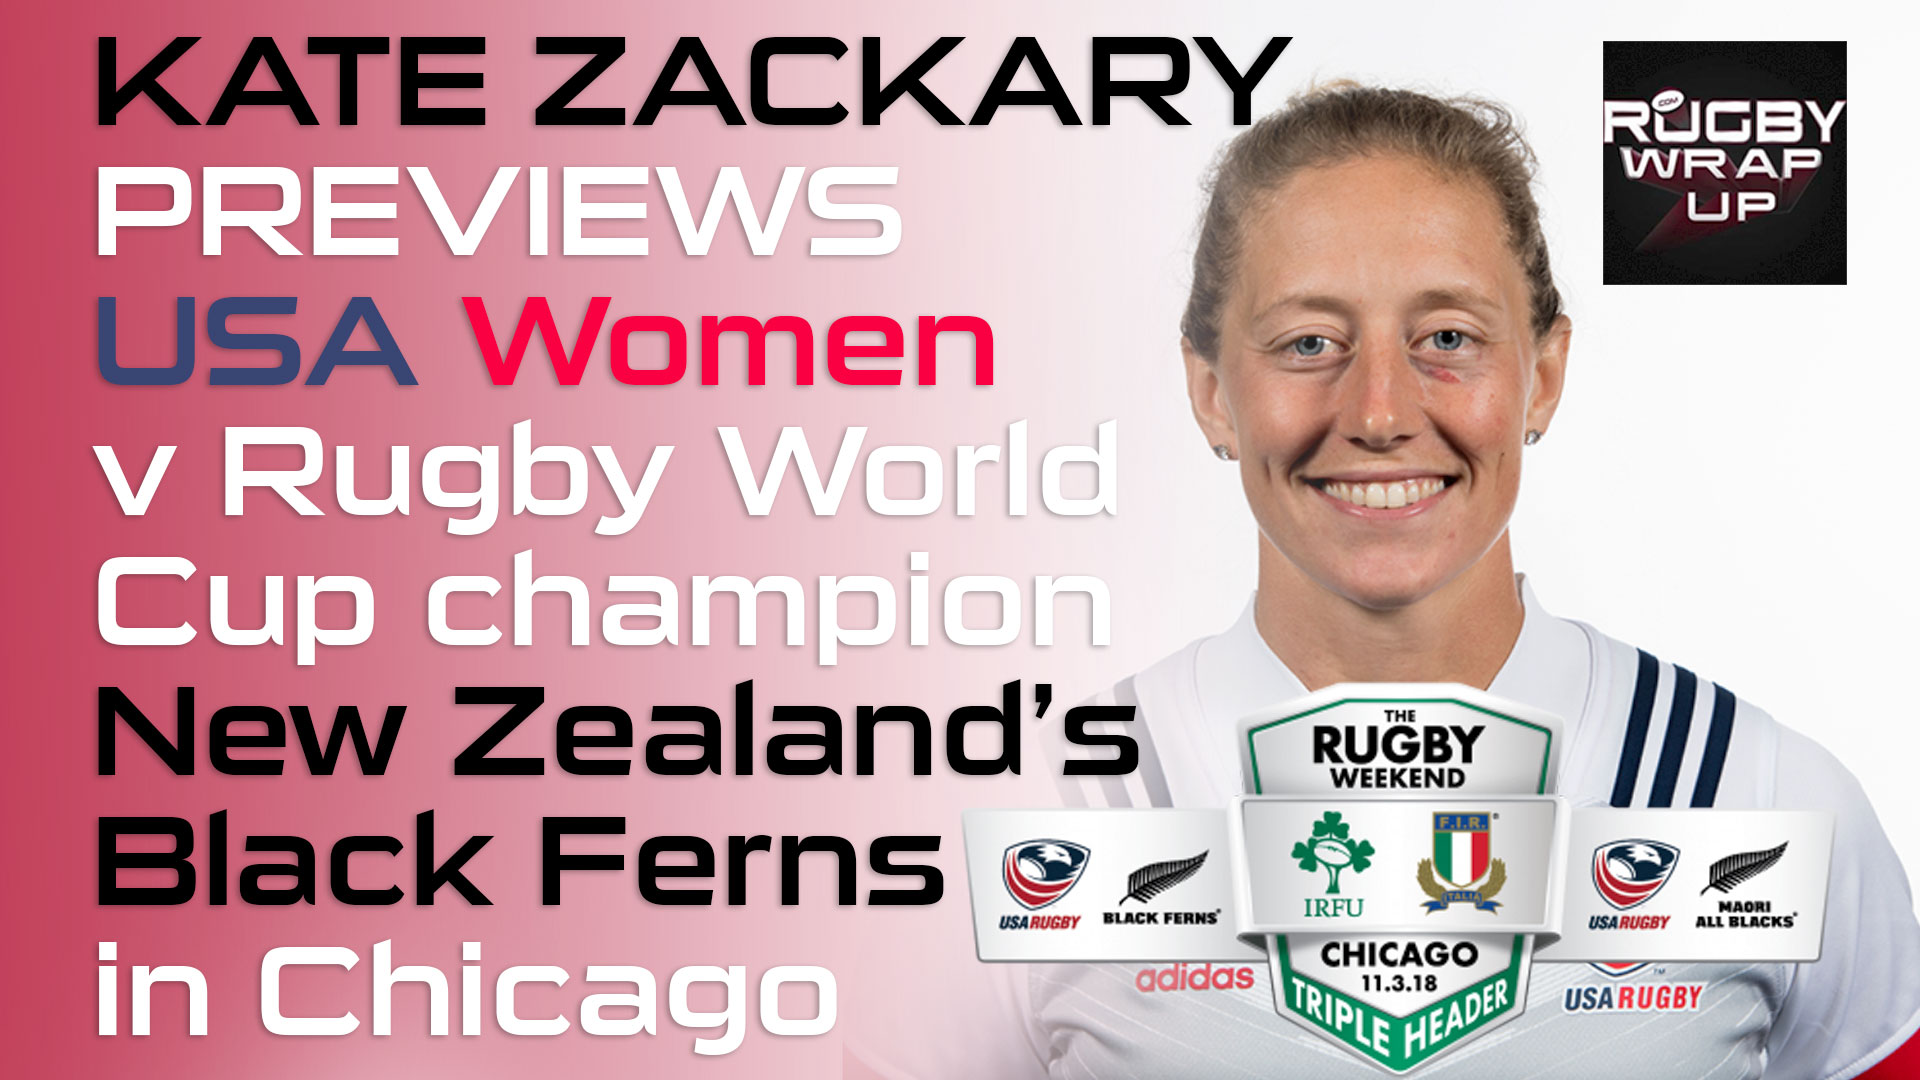 KATE_ZACKARY, Rugby_Wrap_Up, USA_Women_15s, Rugby-World-Cup, New-Zealand All Blacks, Black_Ferns, Chicago, #TheRugbyWeekend